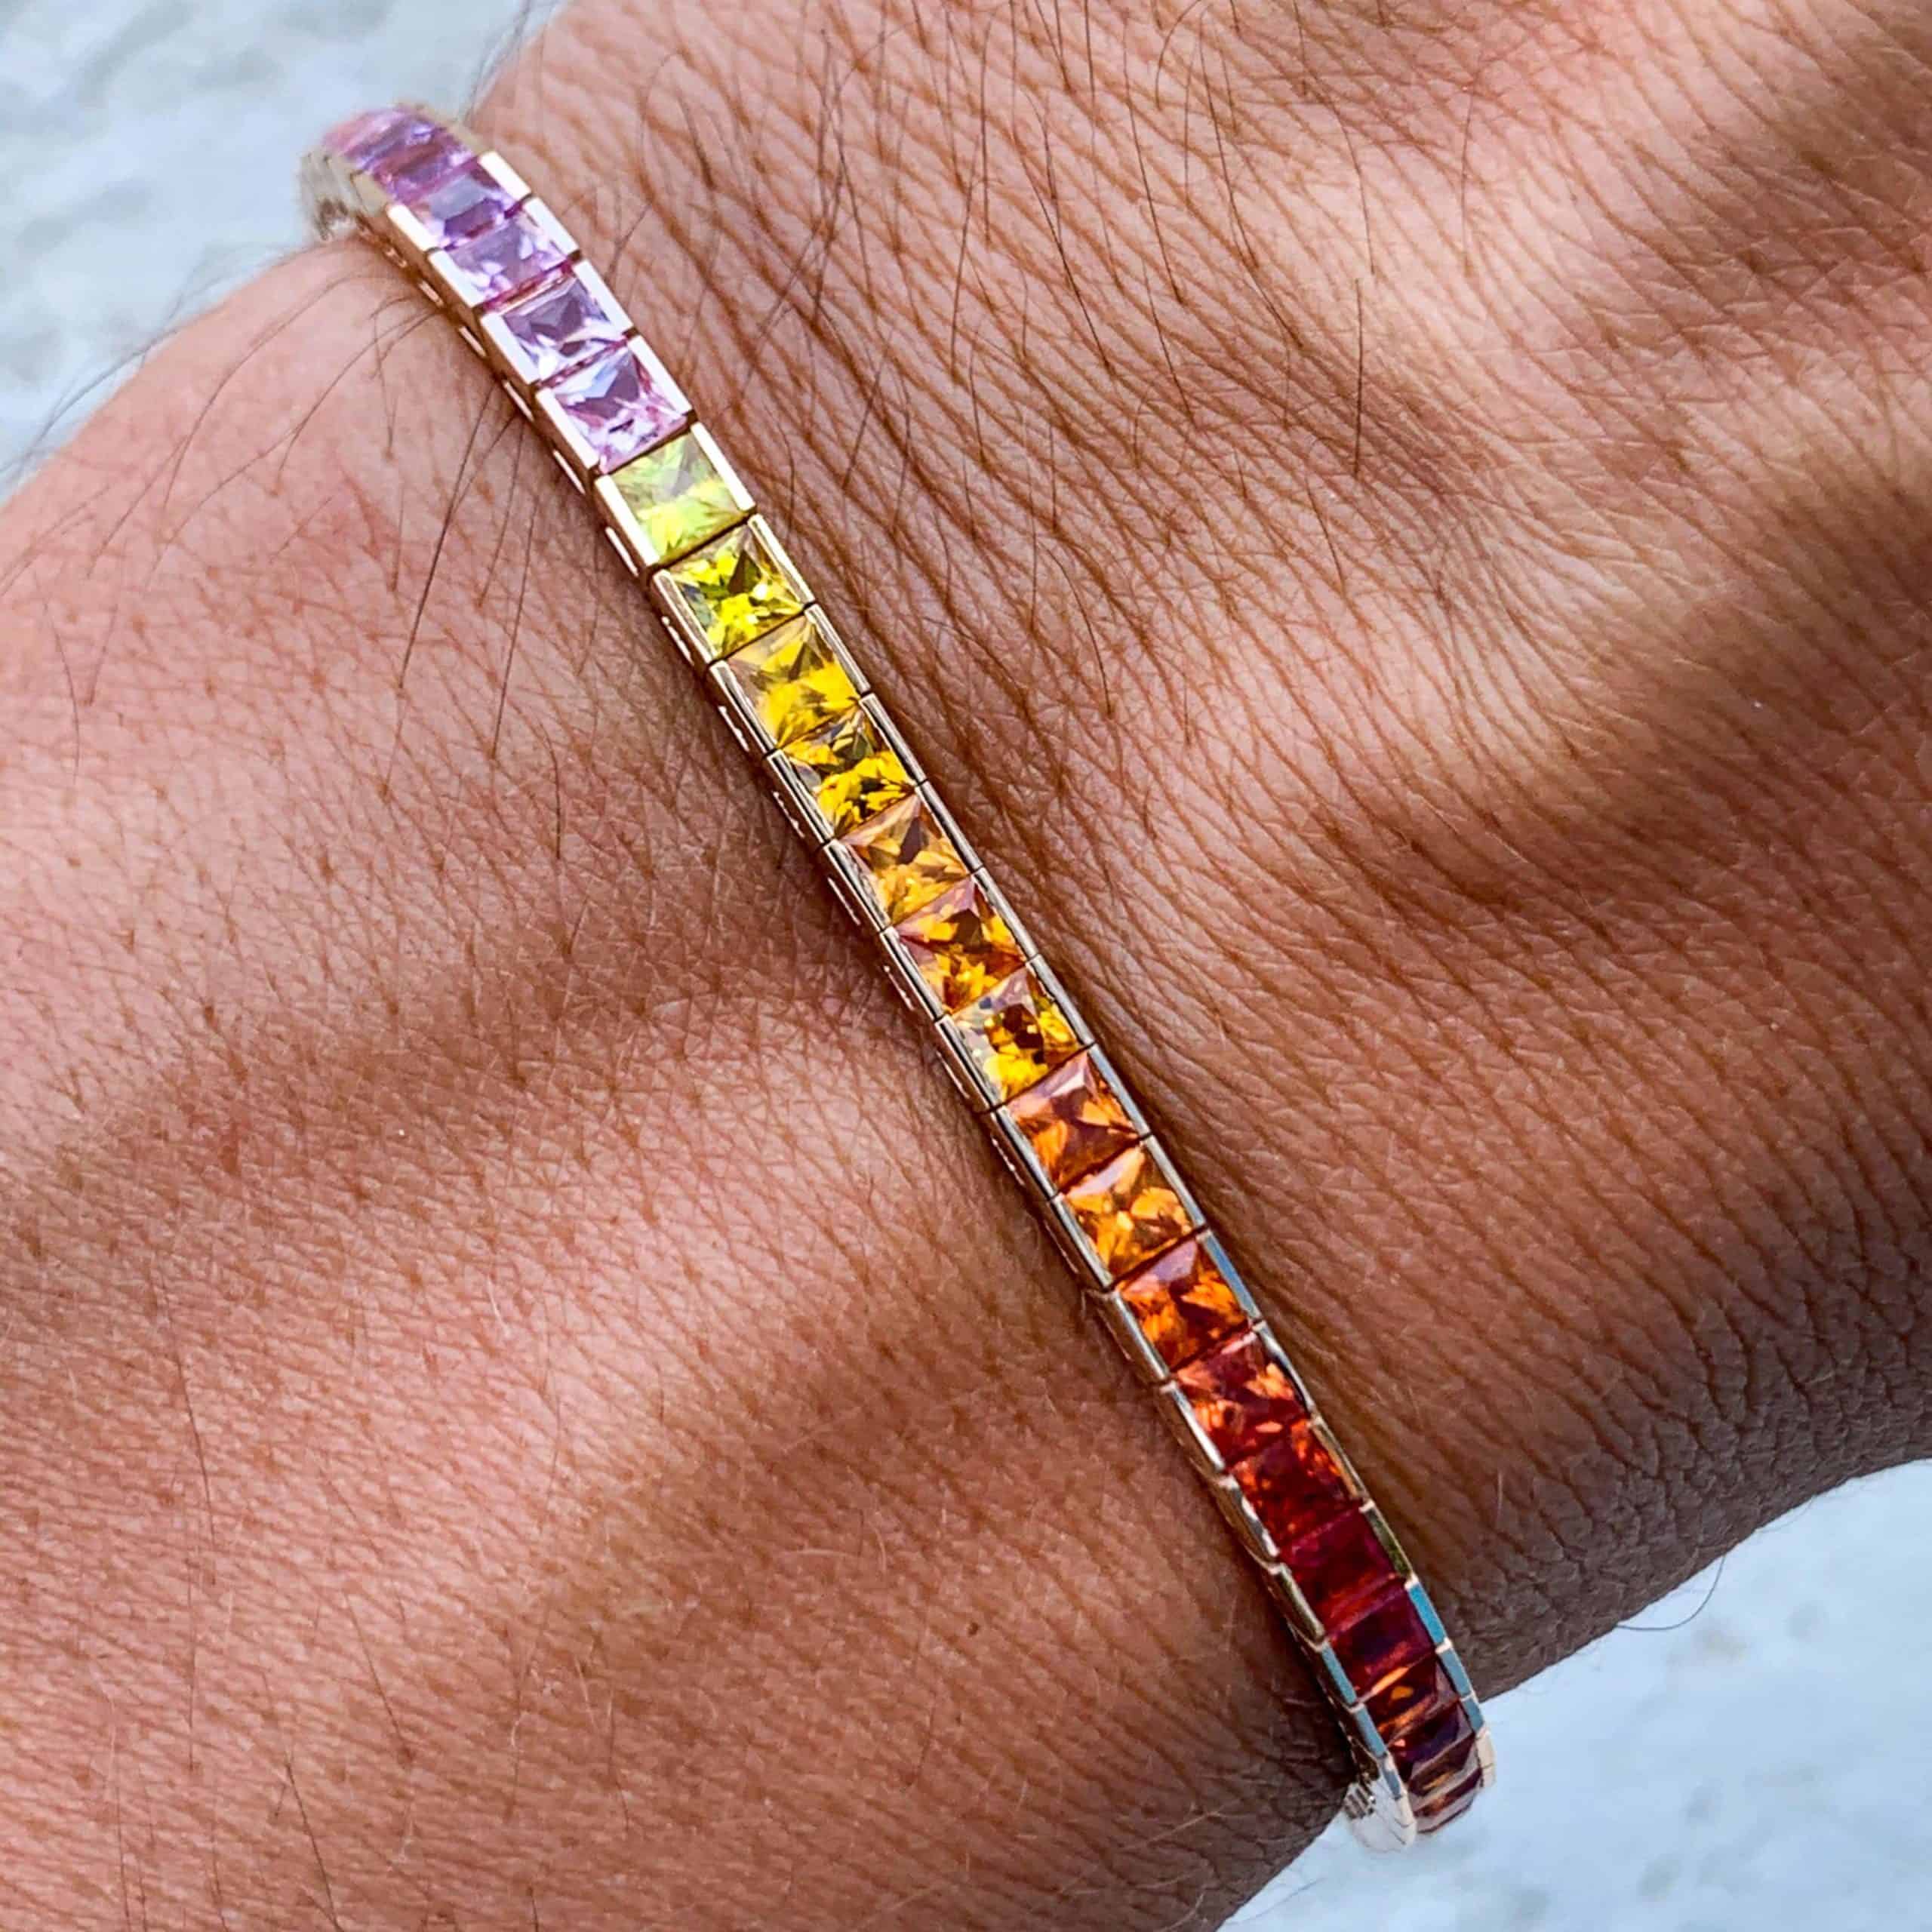 Is this a unisex bracelet or no… sorry if a dumb question : r/jewelry